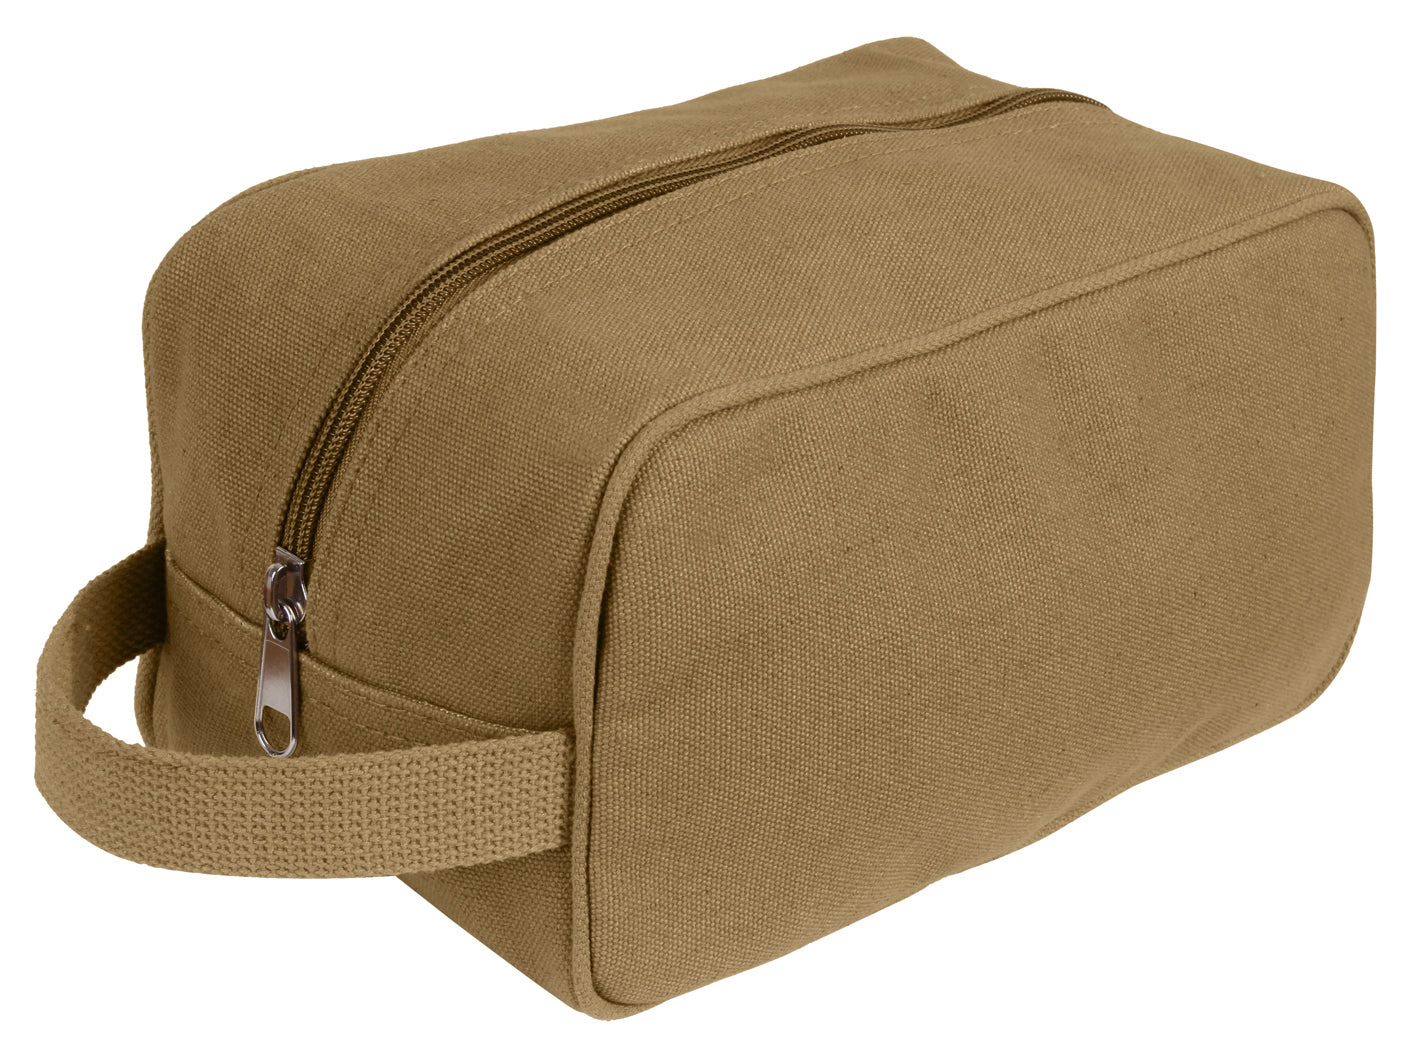 Milspec Canvas Travel Kit Gifts For Him MilTac Tactical Military Outdoor Gear Australia